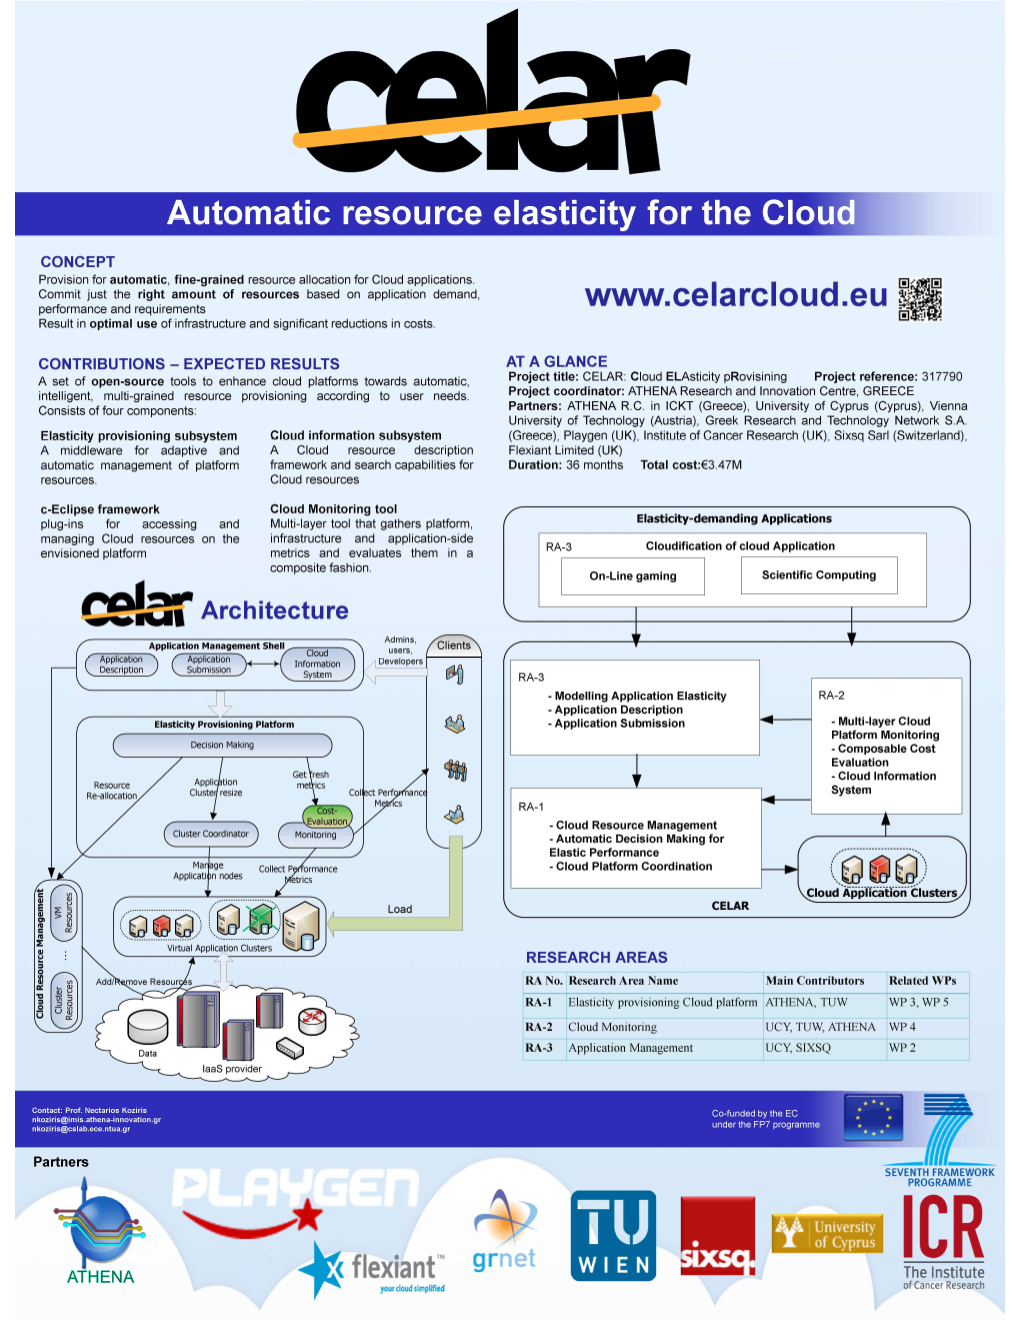 Automatic Resource Elasticity for the Cloud